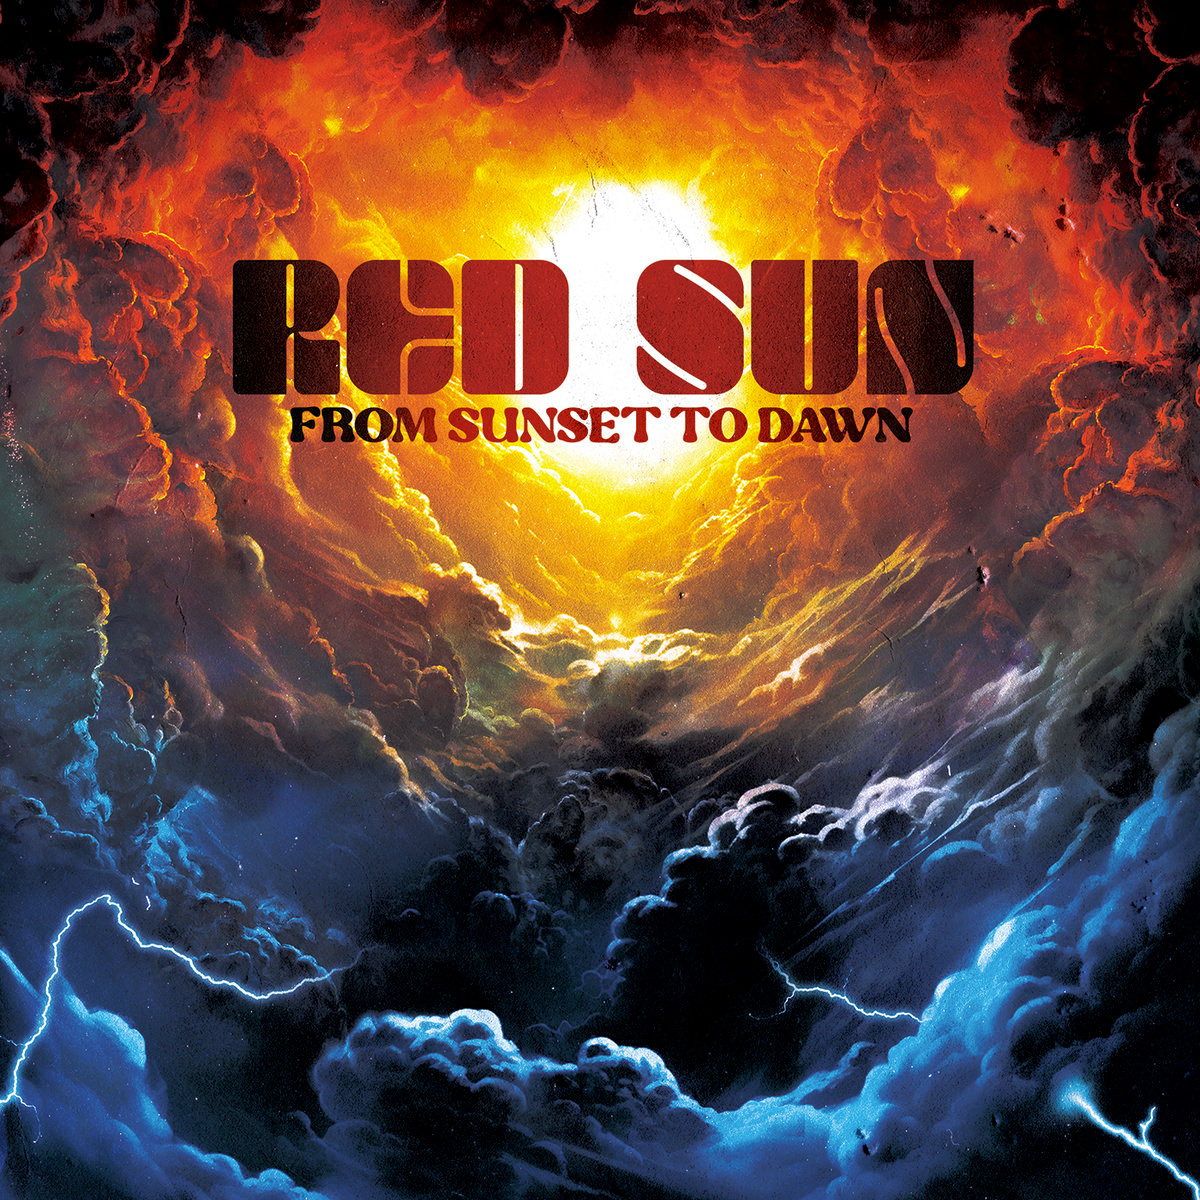 From Sunset to Dawn by Red Sun